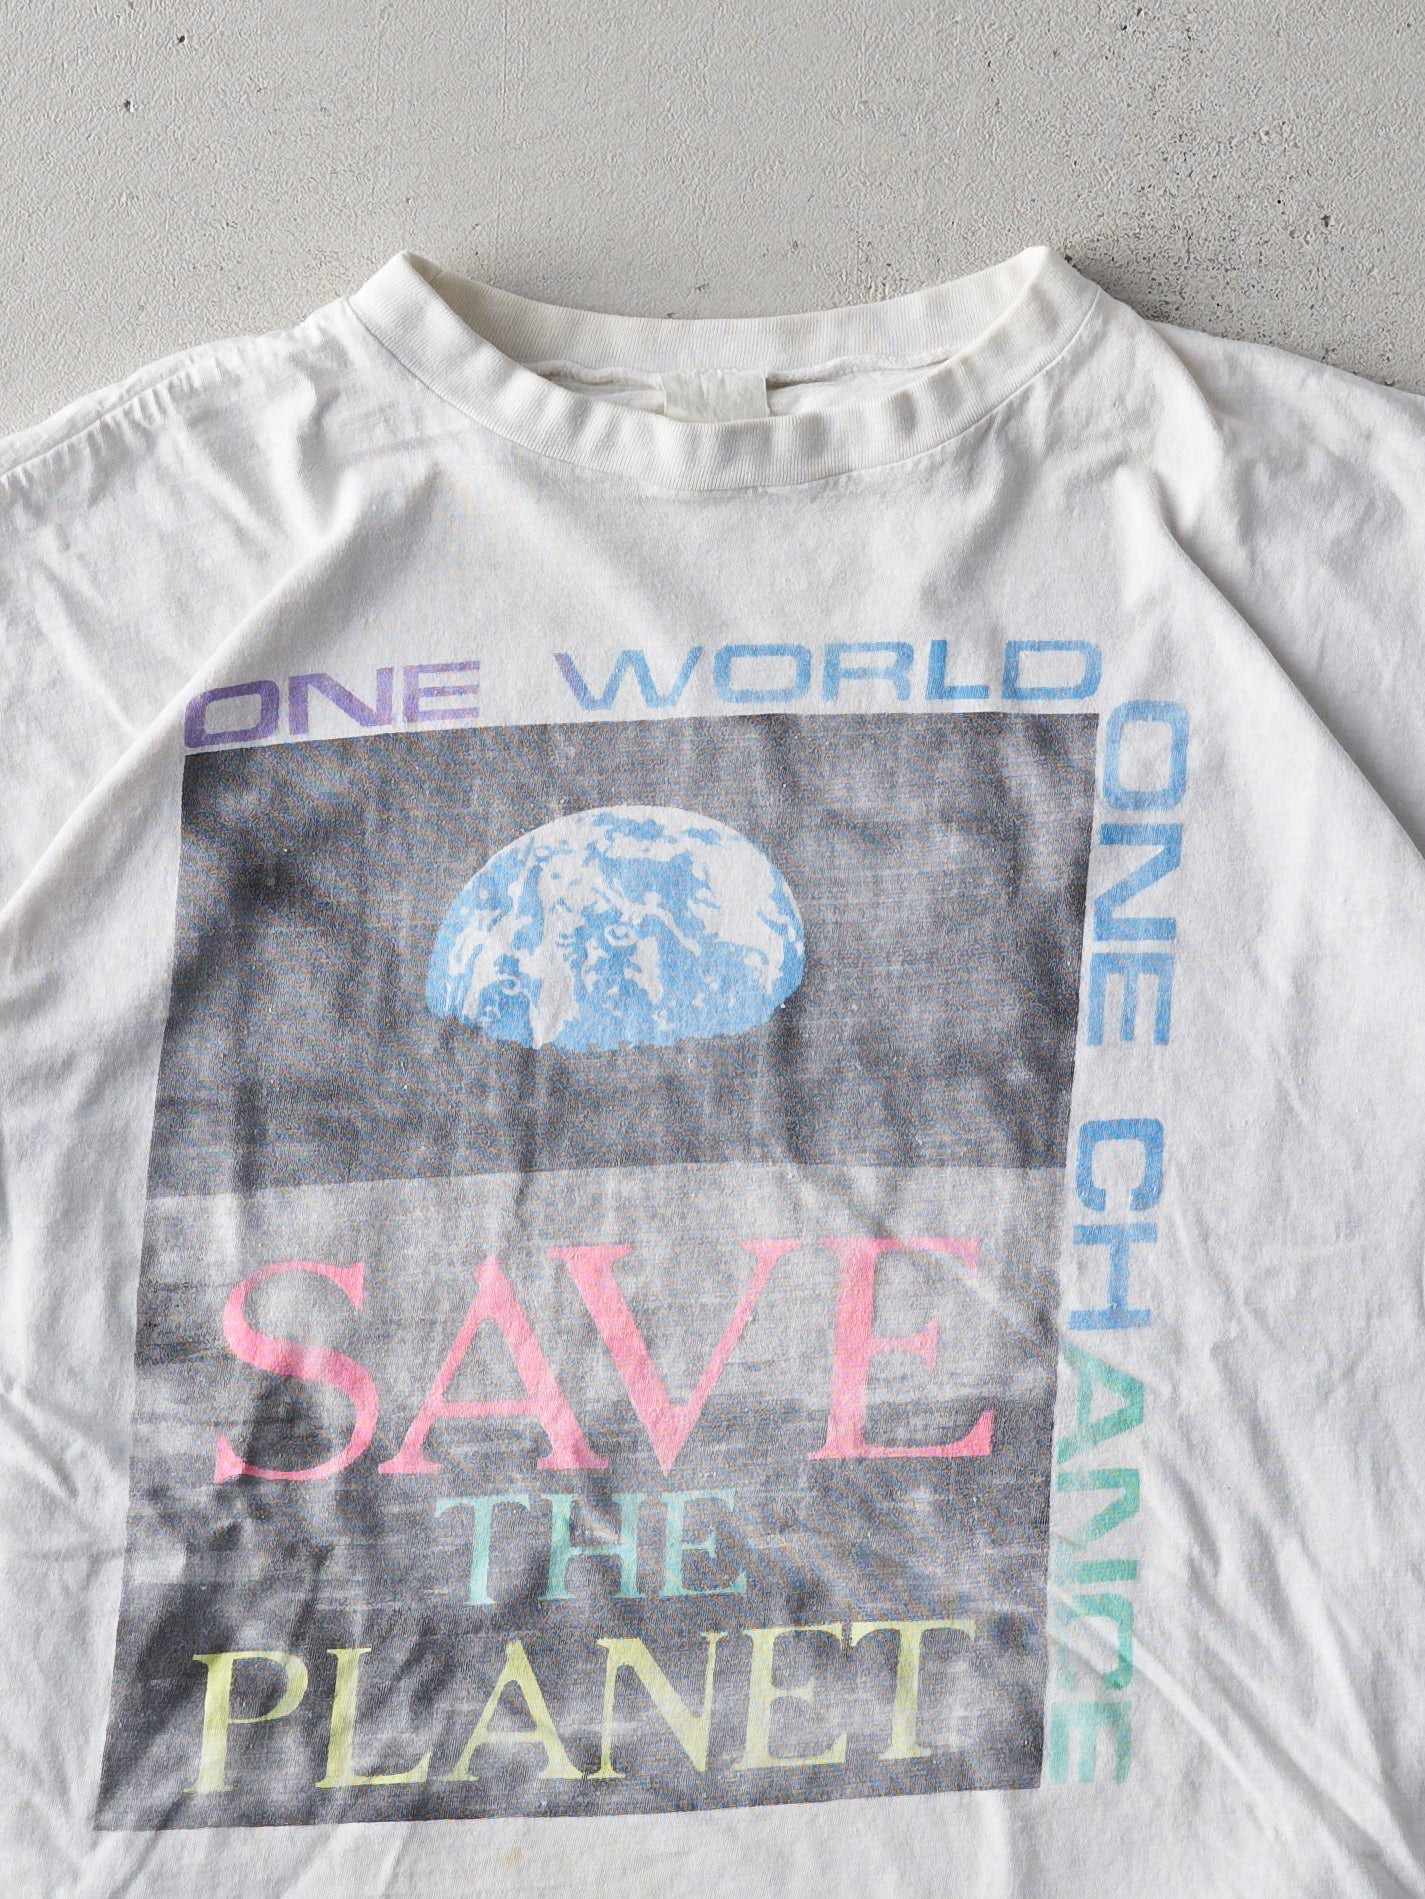 Vintage 90s White "Save The Planet" Boxy Tee (M)